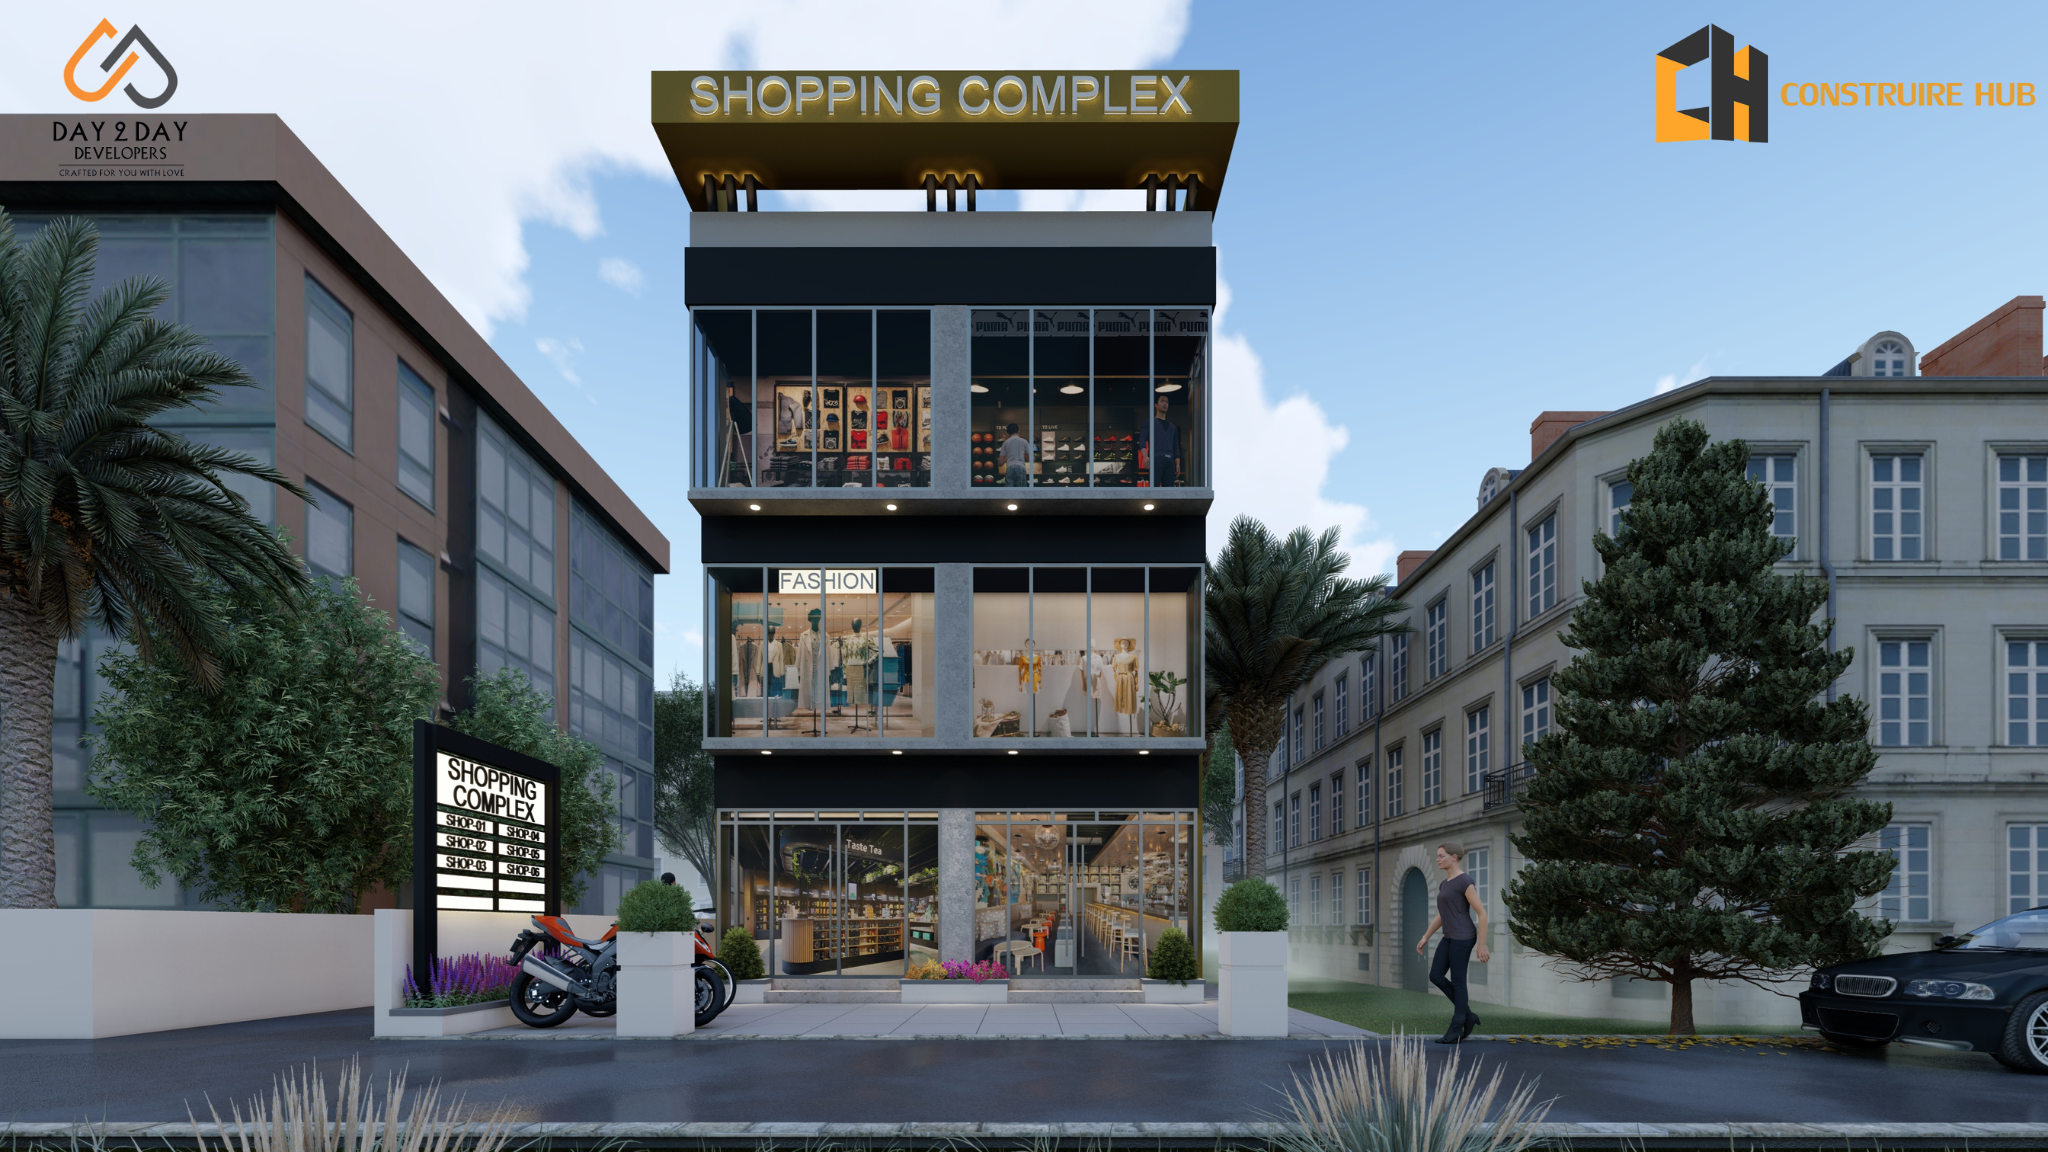 SHOPPING COMPLEX AT THRISSUR